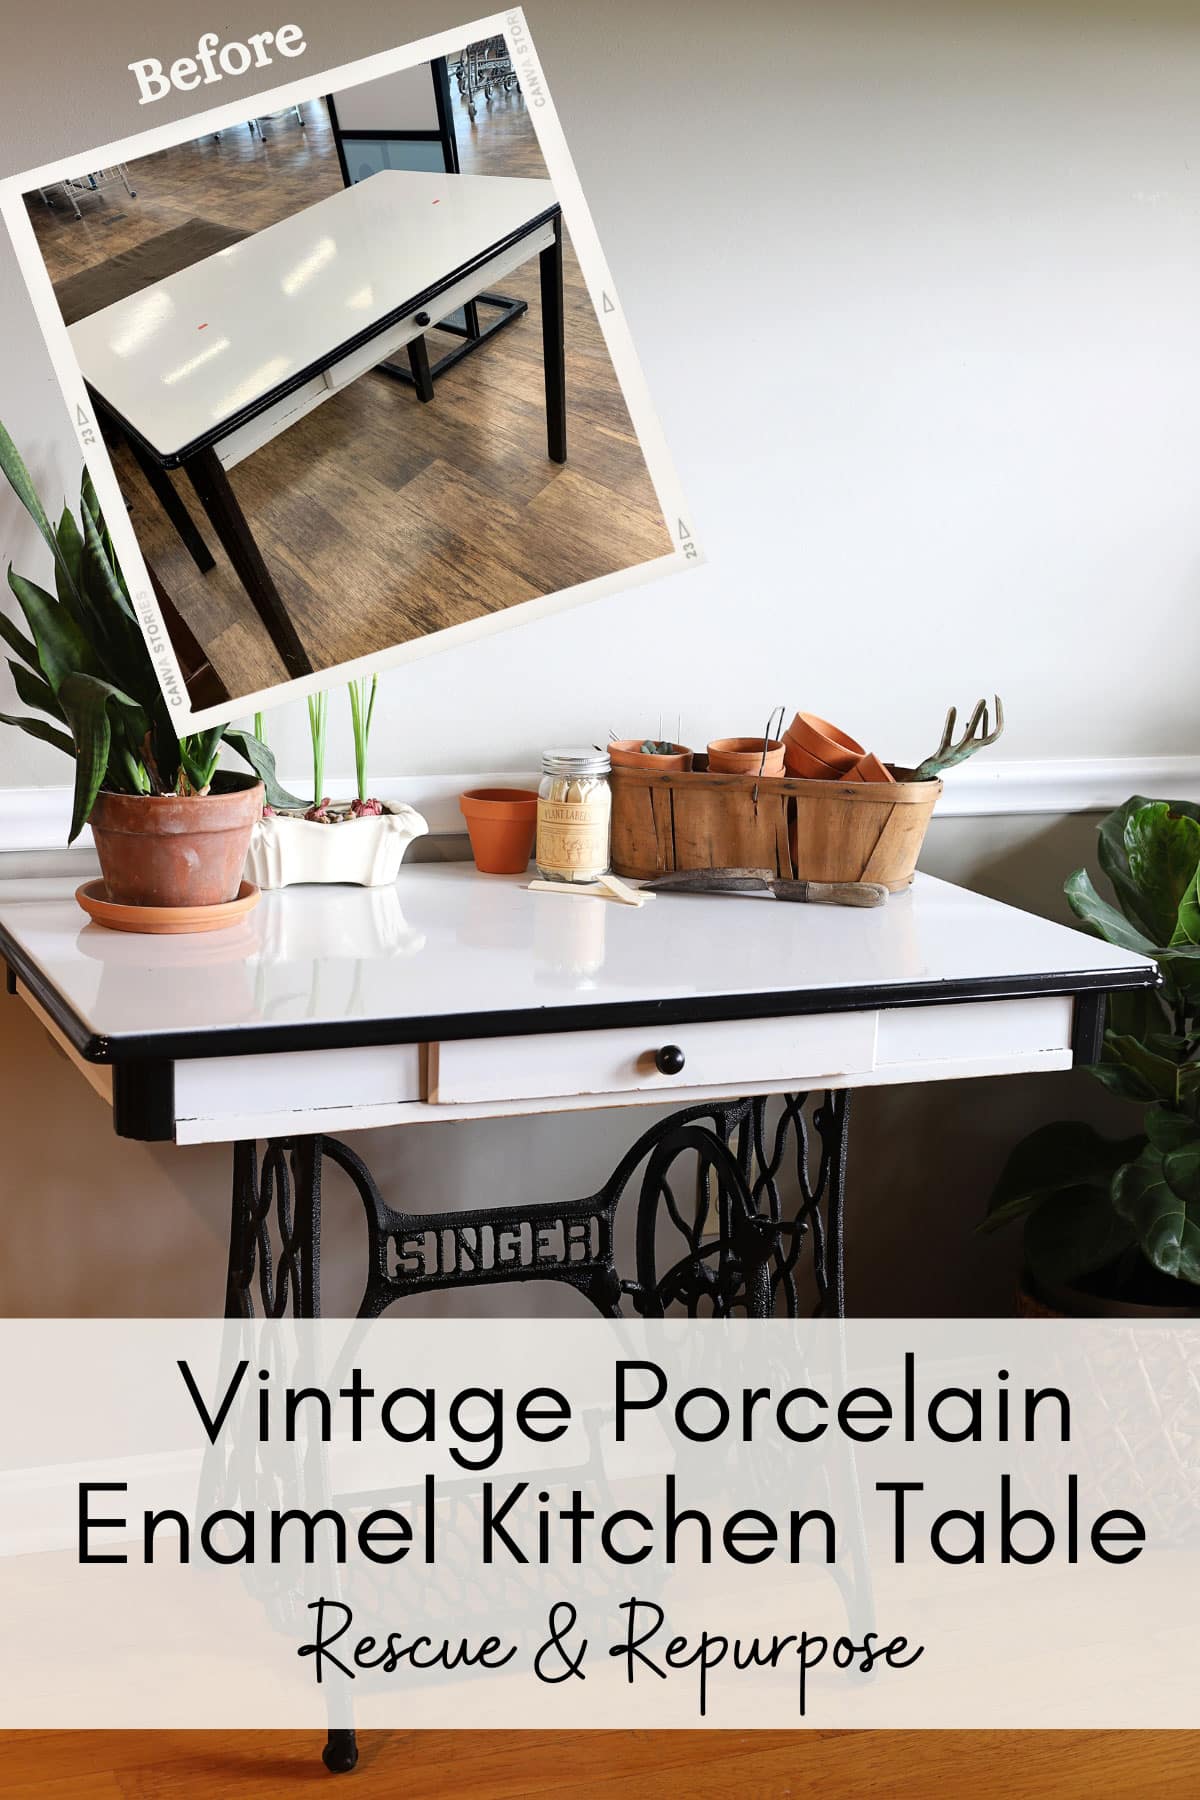 This eco-friendly upcycling project combines a thrifted porcelain enamel table with a vintage Singer sewing machine base for a unique retro-style table.